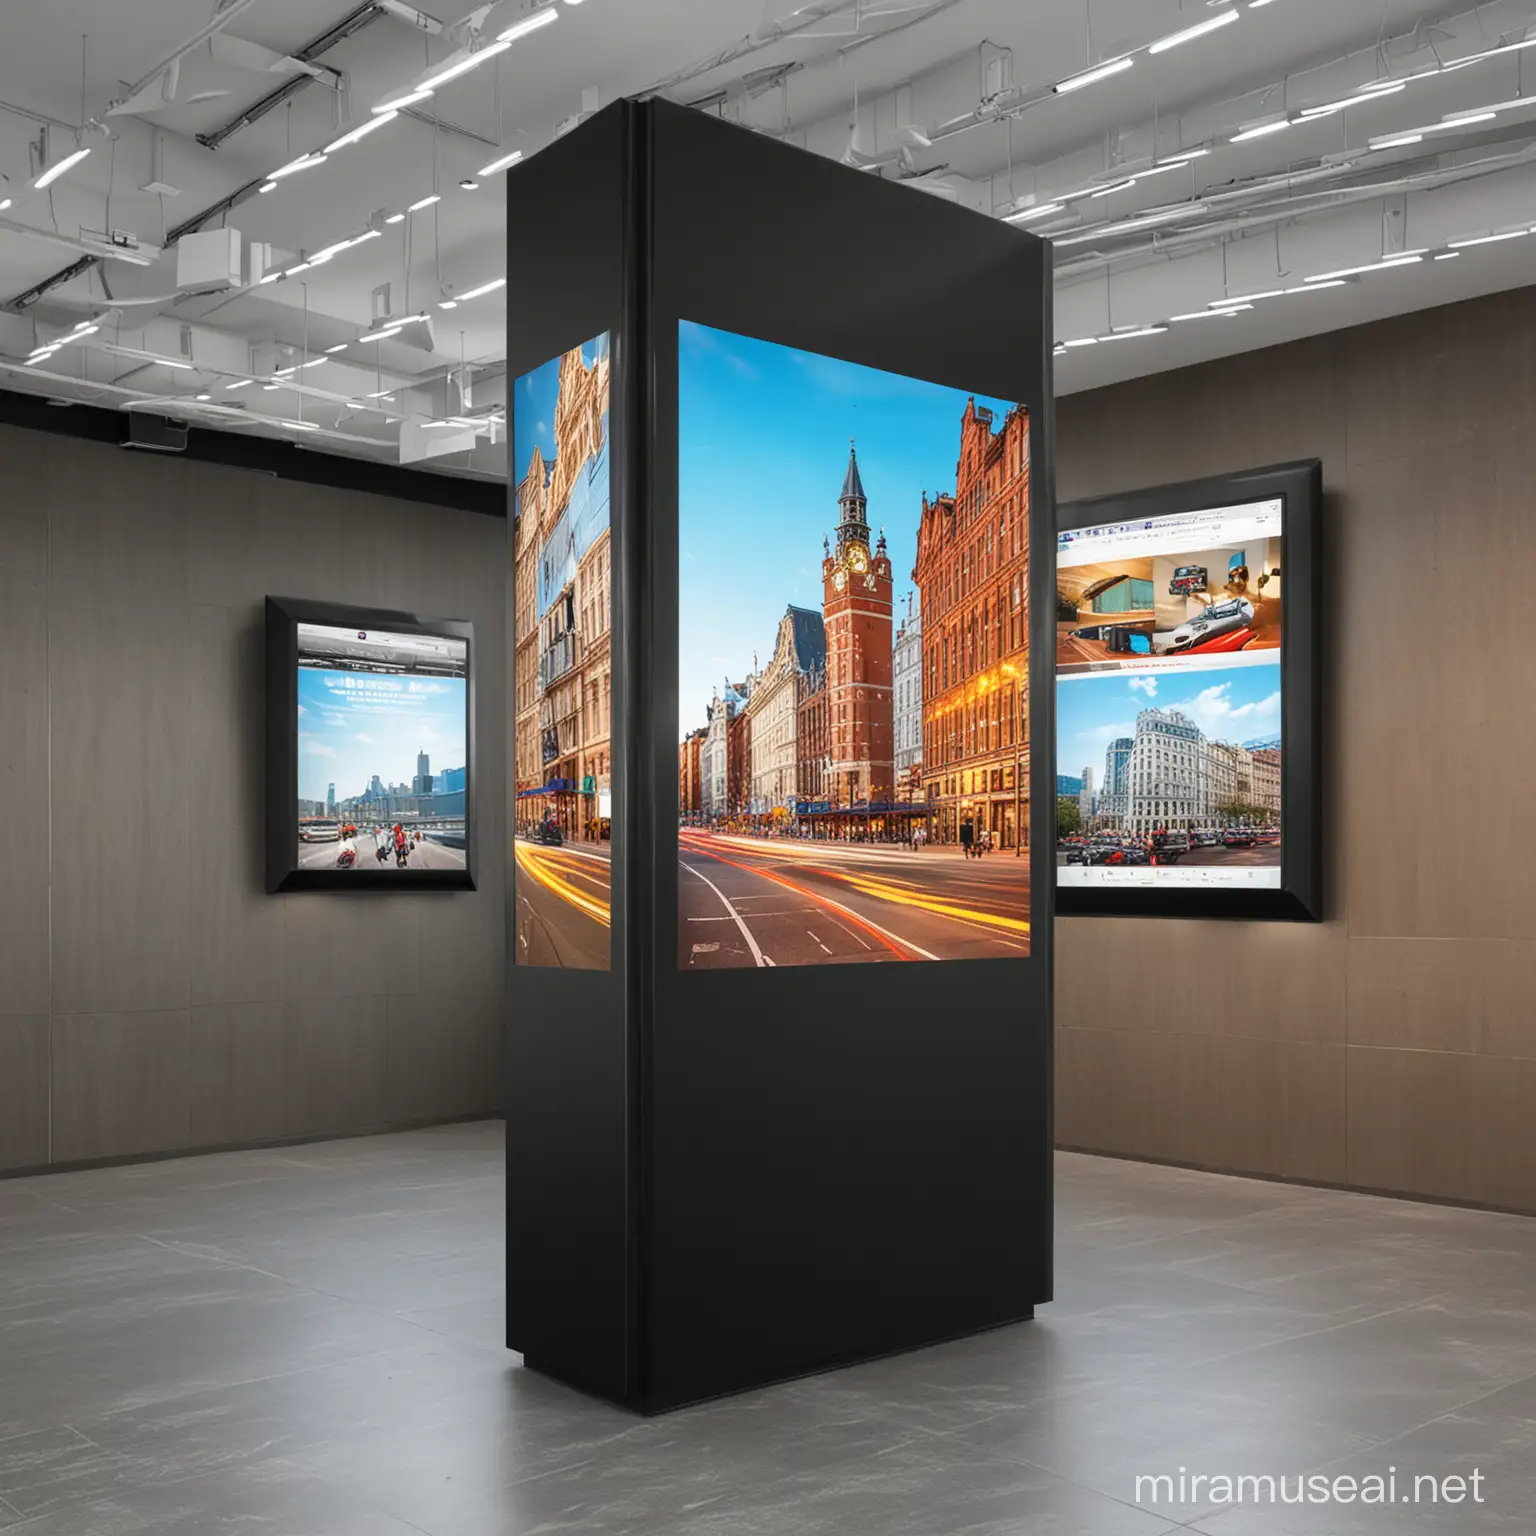 Create an illustrative image highlighting the diverse form-factors of LED displays. Include representations of stand-alone displays, standees with built-in screens, wall-mounted setups, and variations with touch and non-touch capabilities. Each form-factor should be distinct and clearly labeled, showcasing their unique features and versatility. Use a modern and sleek design to emphasize the technology's flexibility and adaptability to different environments. The image should convey the range of options available for deploying LED displays in various settings, from interactive touchscreens to space-saving wall mounts.